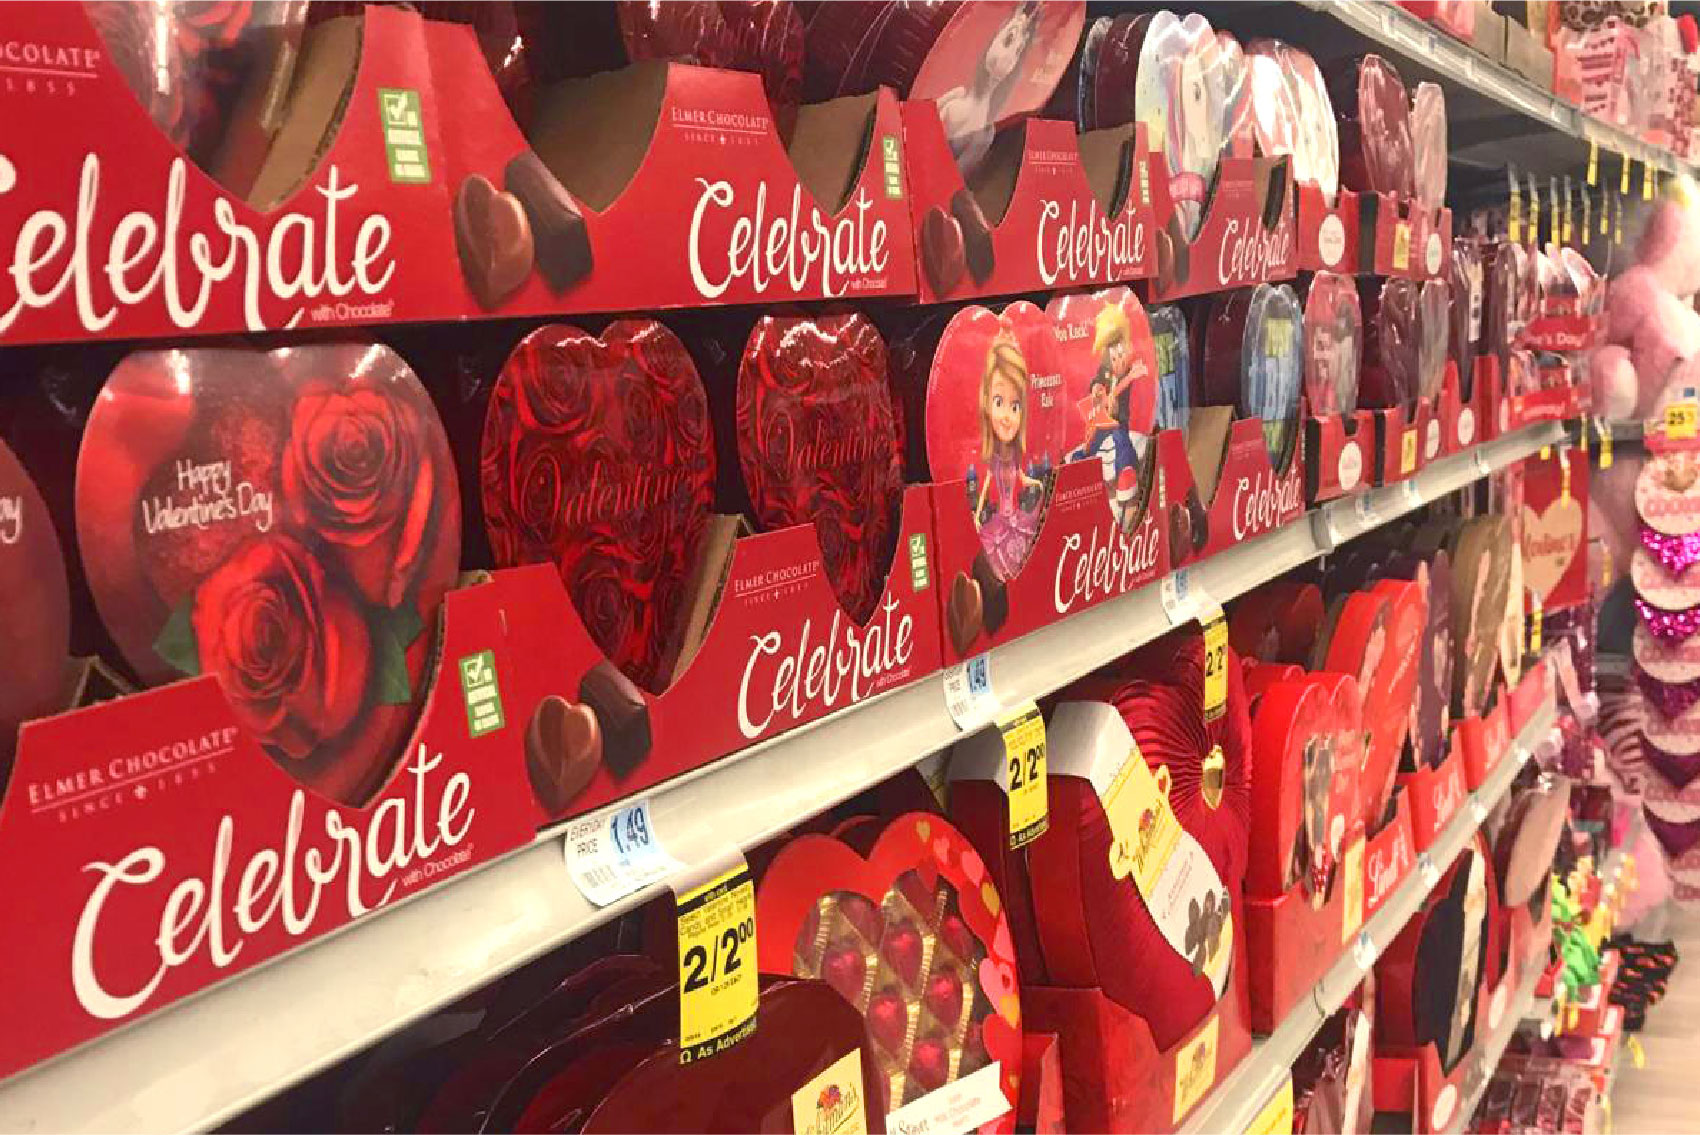 Store aisle filled with Valentine's Day candy